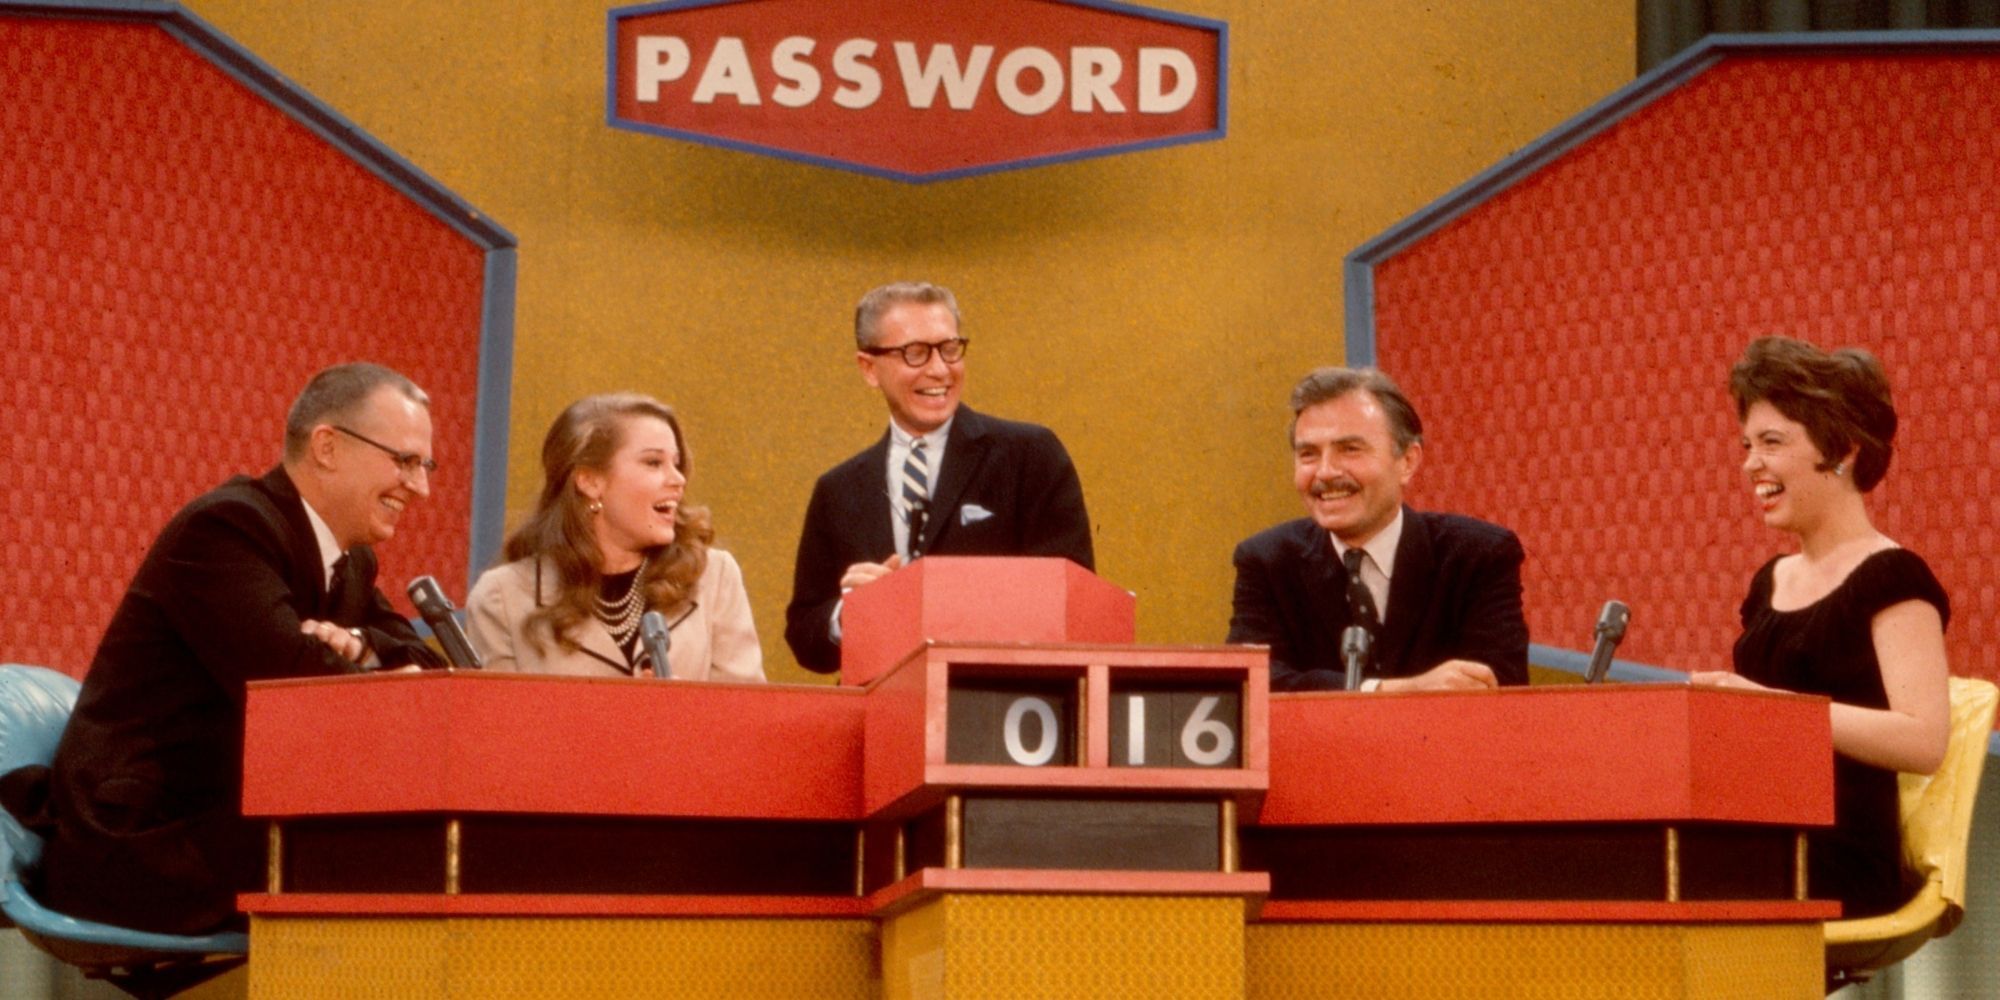 Four competitors in the Password game show